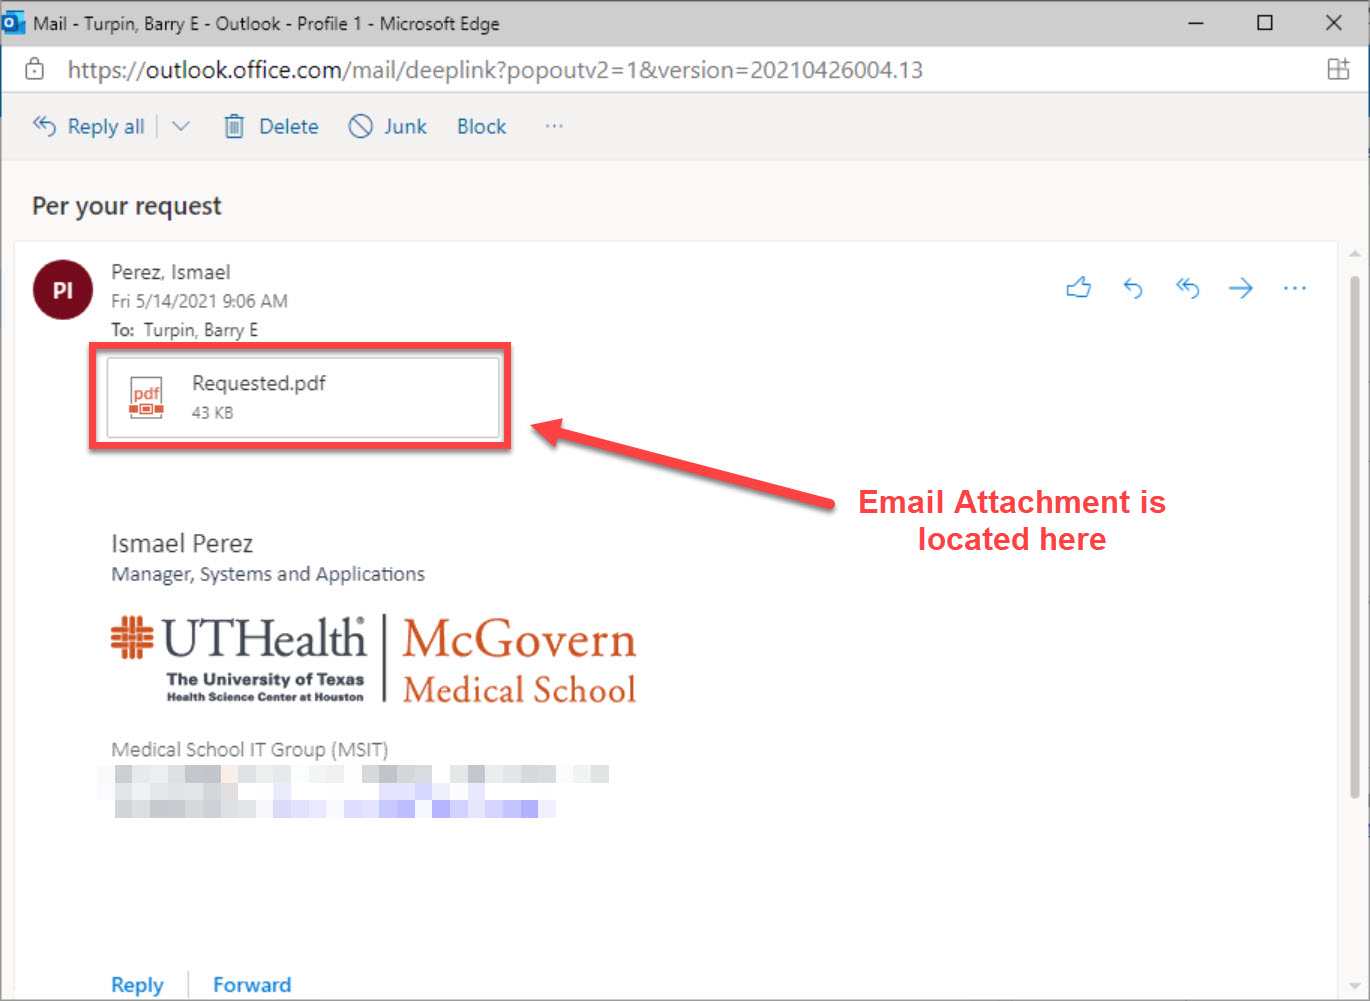 An image that shows the location of attachments in an email - in the upper left hand corner of the email view screen, directly below the name of the Sender and the Receiver of the email.